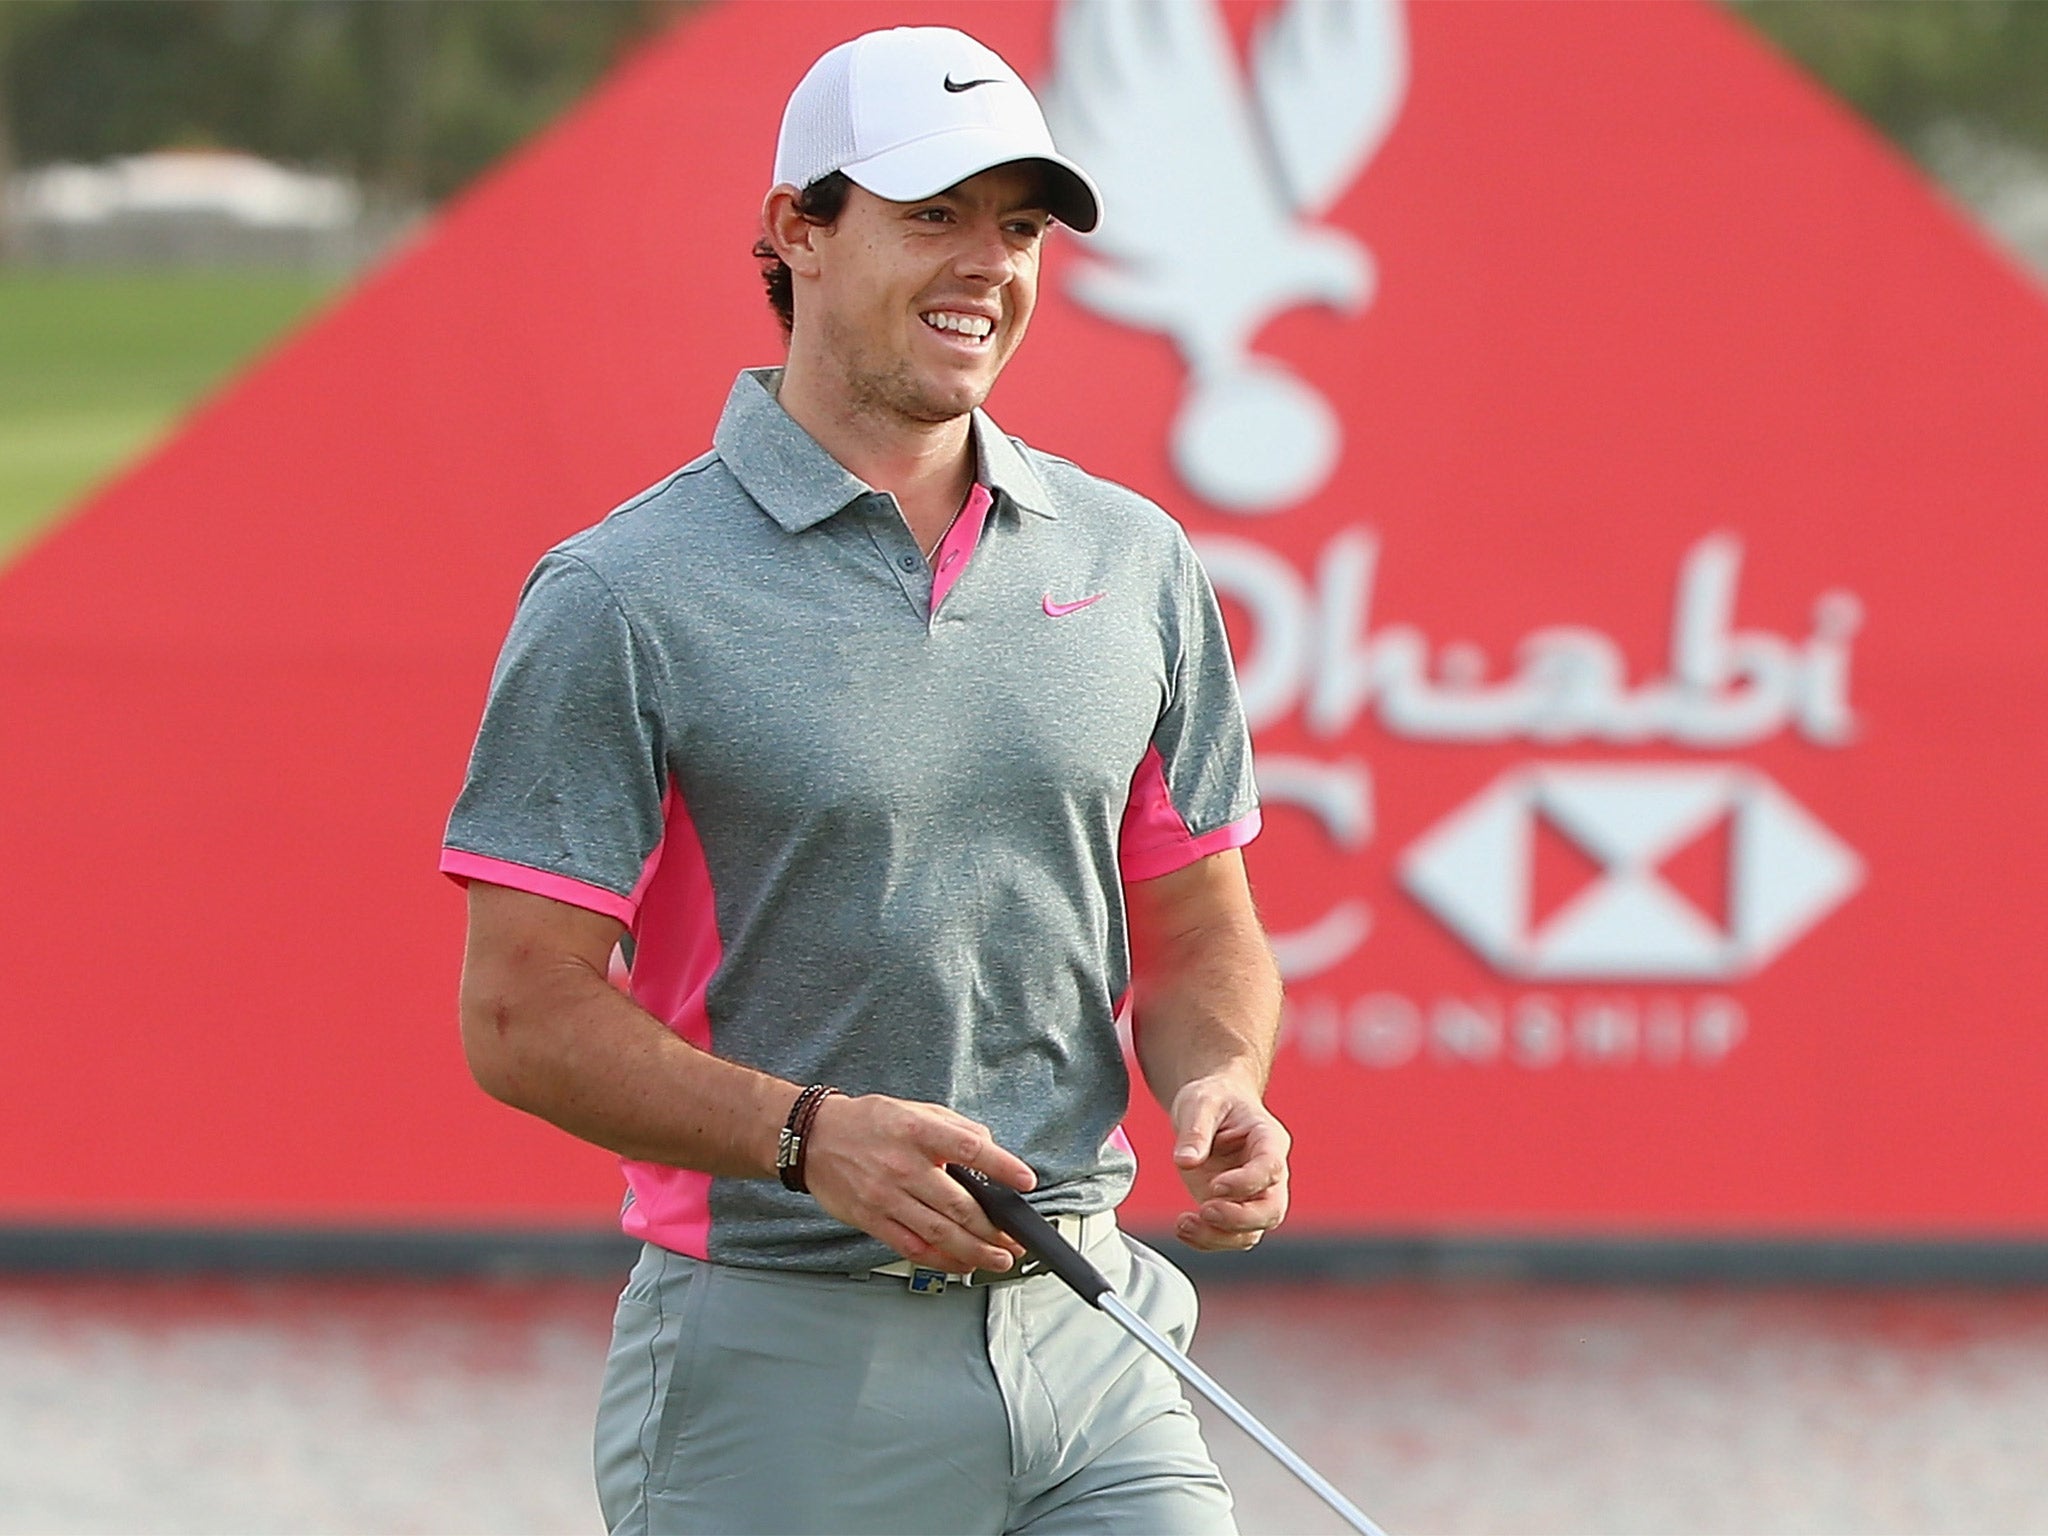 McIlroy earned £27m in prize-money and endorsements last year